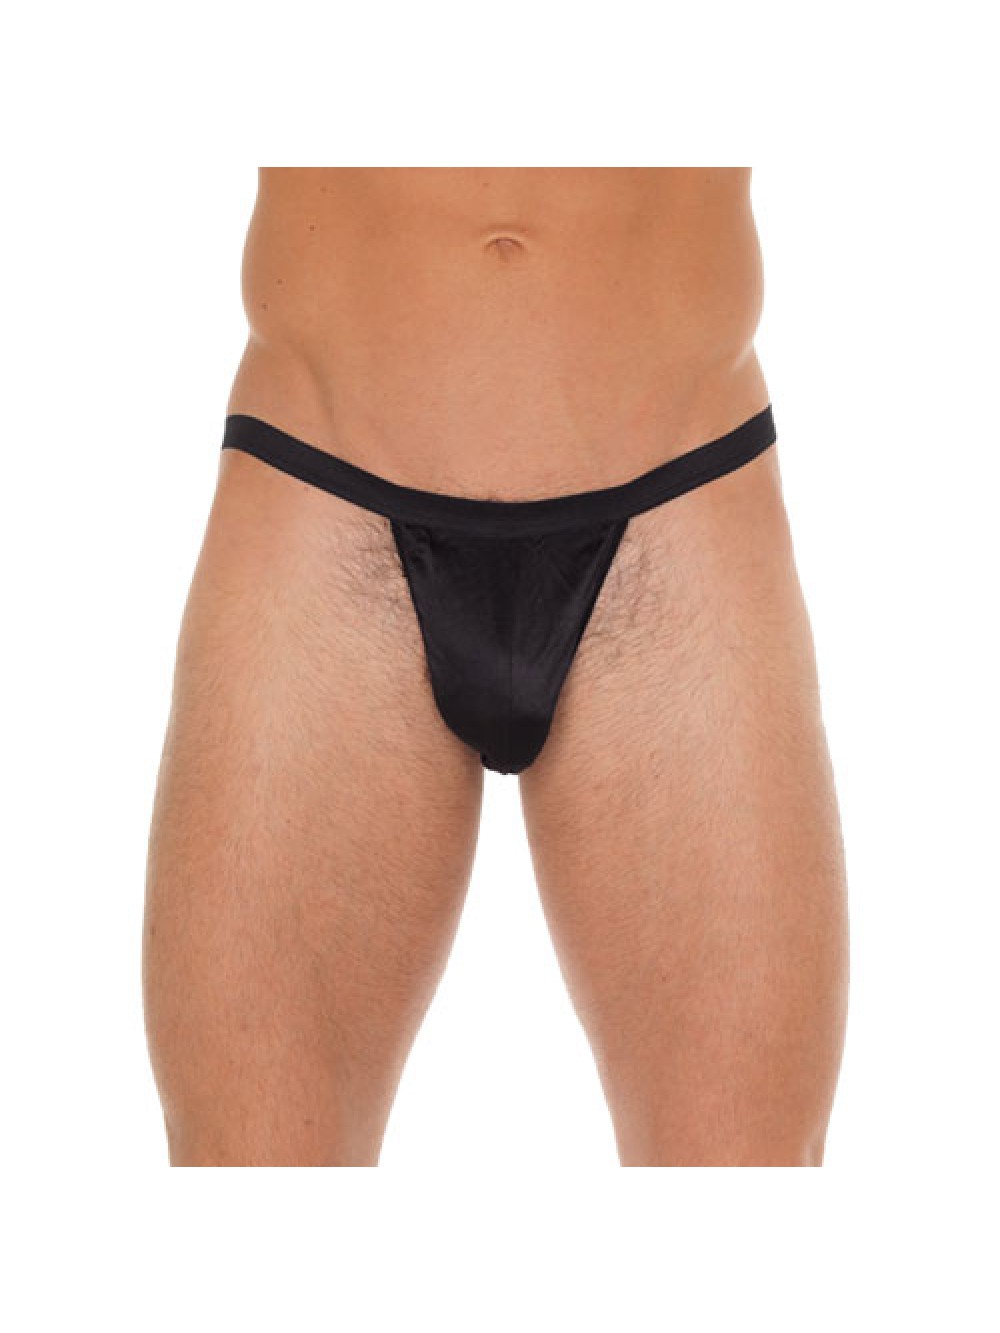 Mens Black G-String With Black Pouch 8718924223581